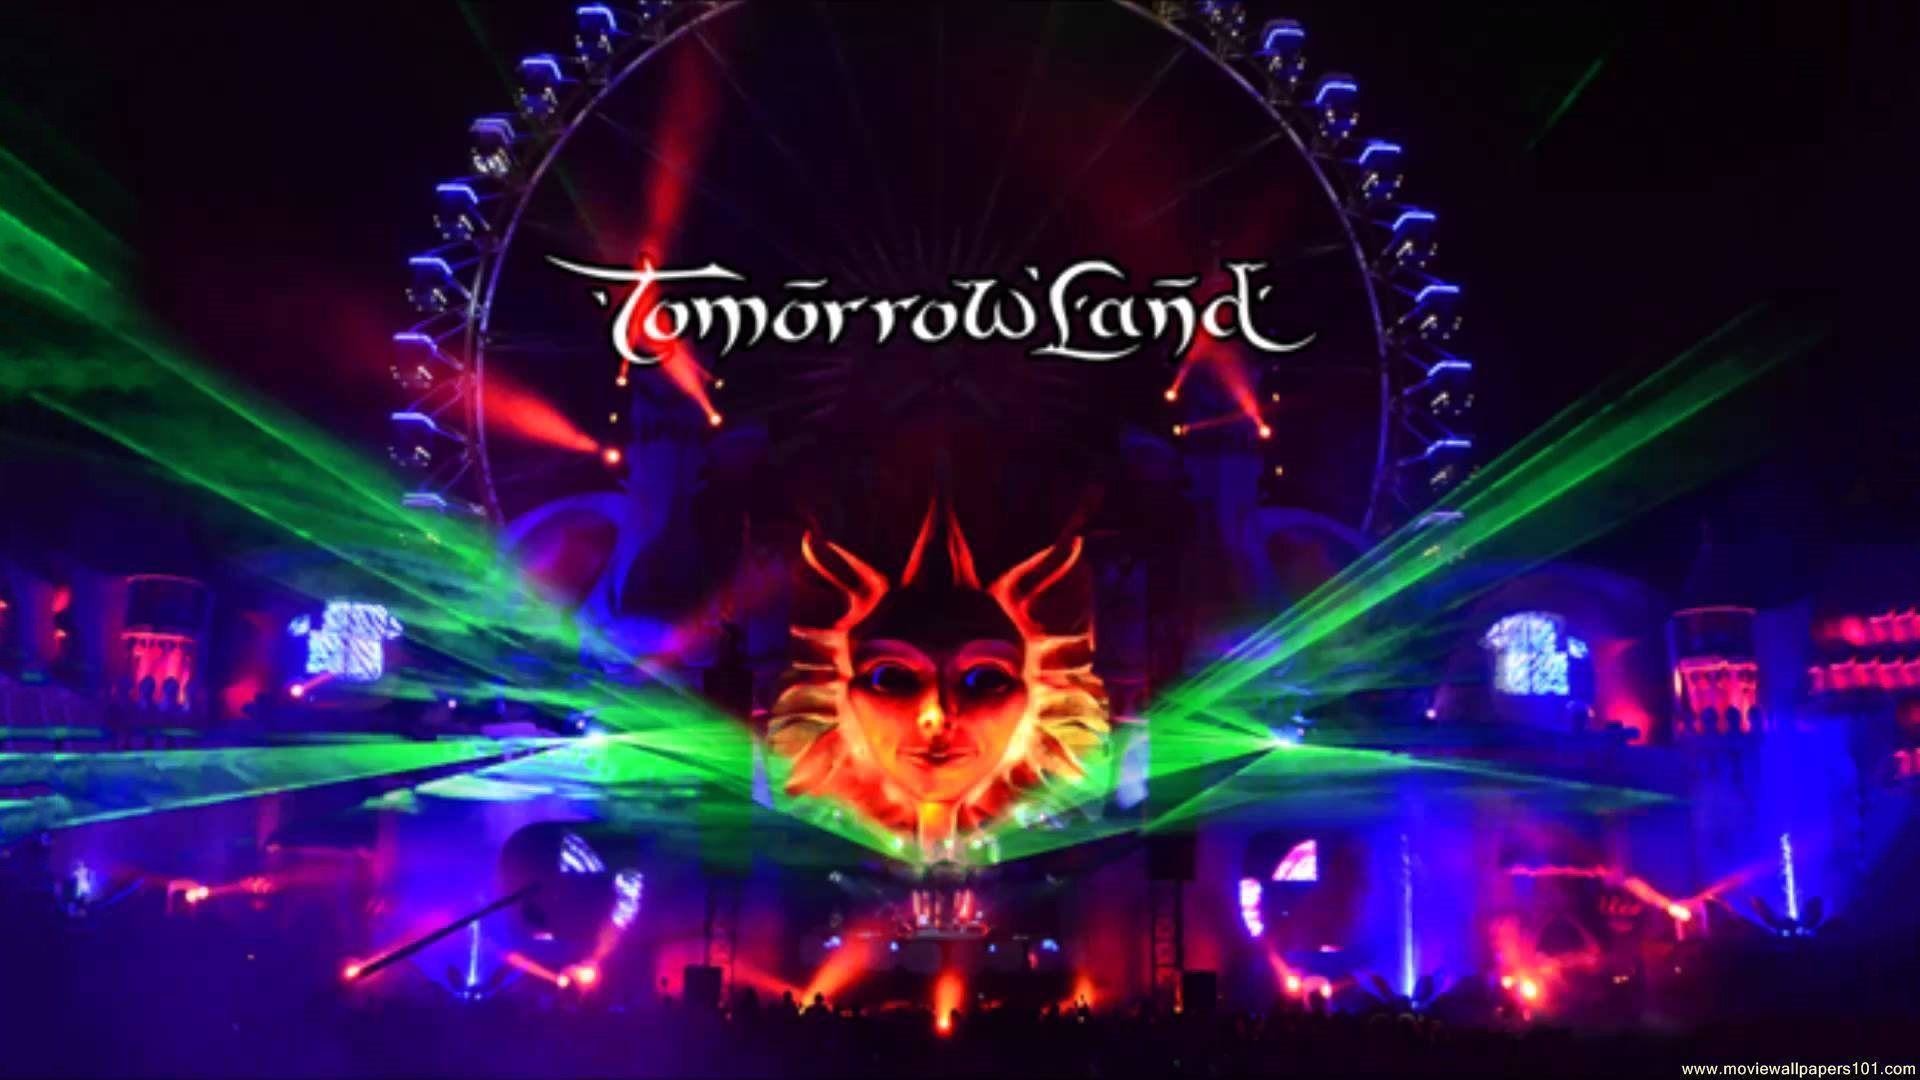 Flagship Laser Immerses Audience In The Dream World - Tomorrowland 2018 Hd Wallpapers 1080p , HD Wallpaper & Backgrounds